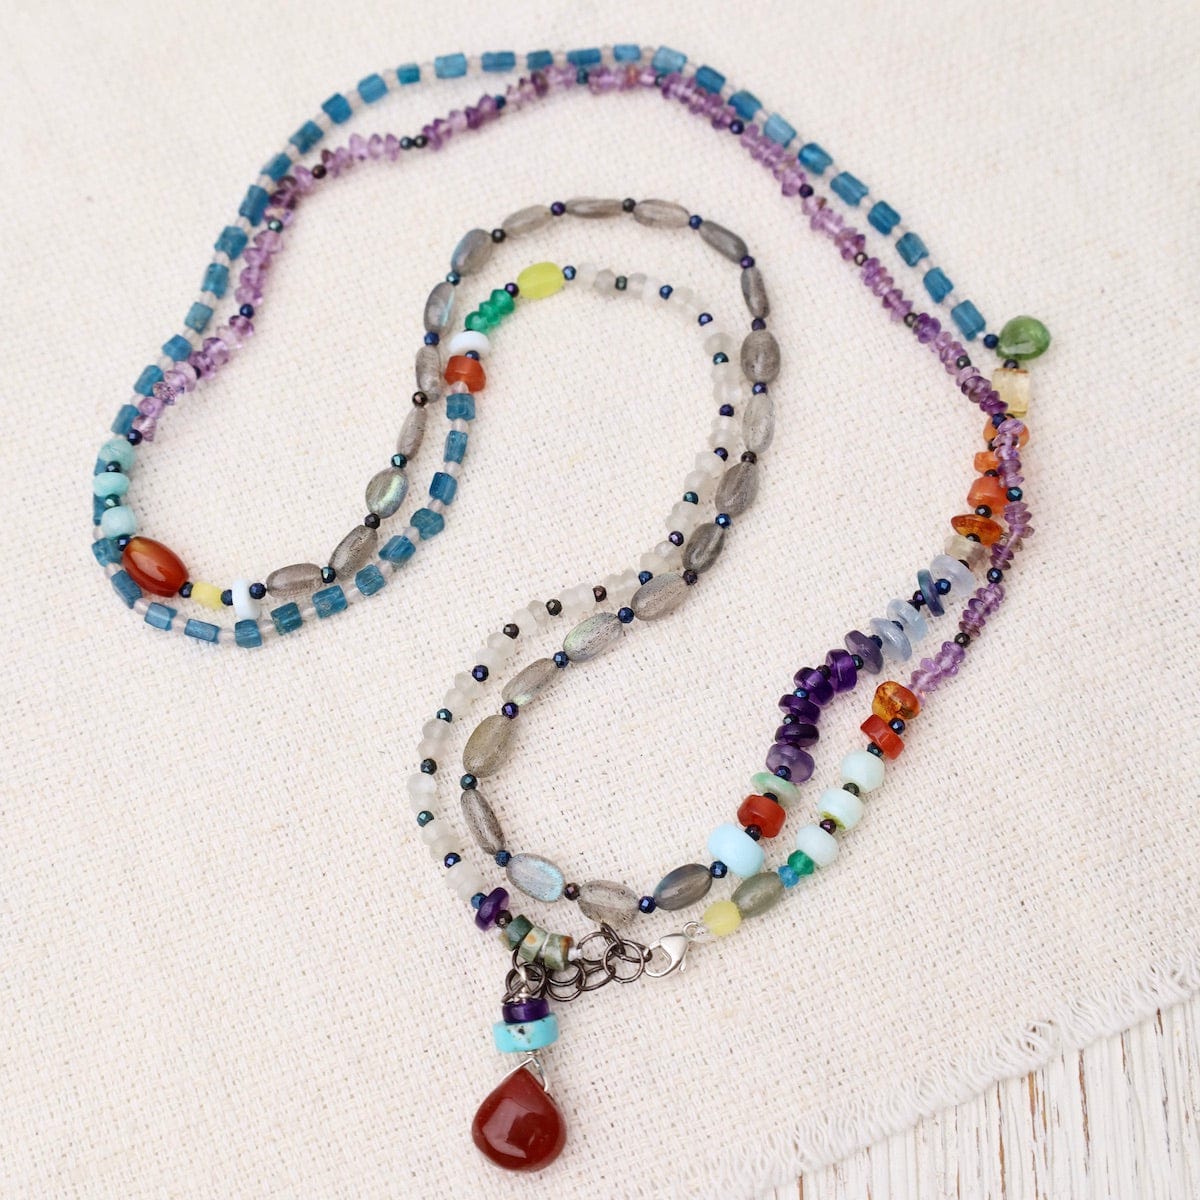 NKL Candy Mix Necklace